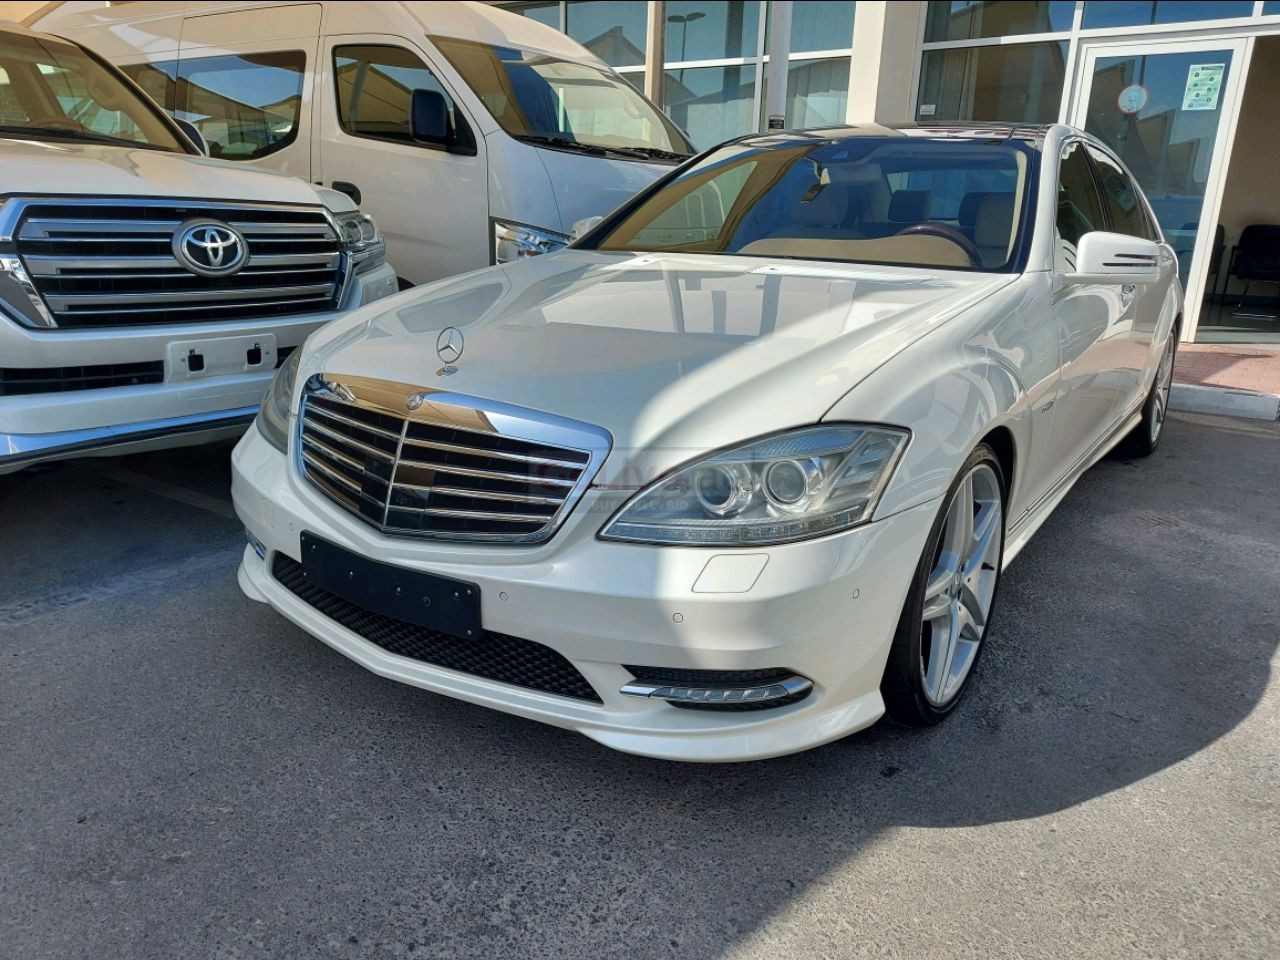 Mercedes Benz S-Class 2012 AED 58,000, GCC Spec, Good condition, Full Option, Sunroof, Lady Use, Navigation System, Fog Lights, Ne